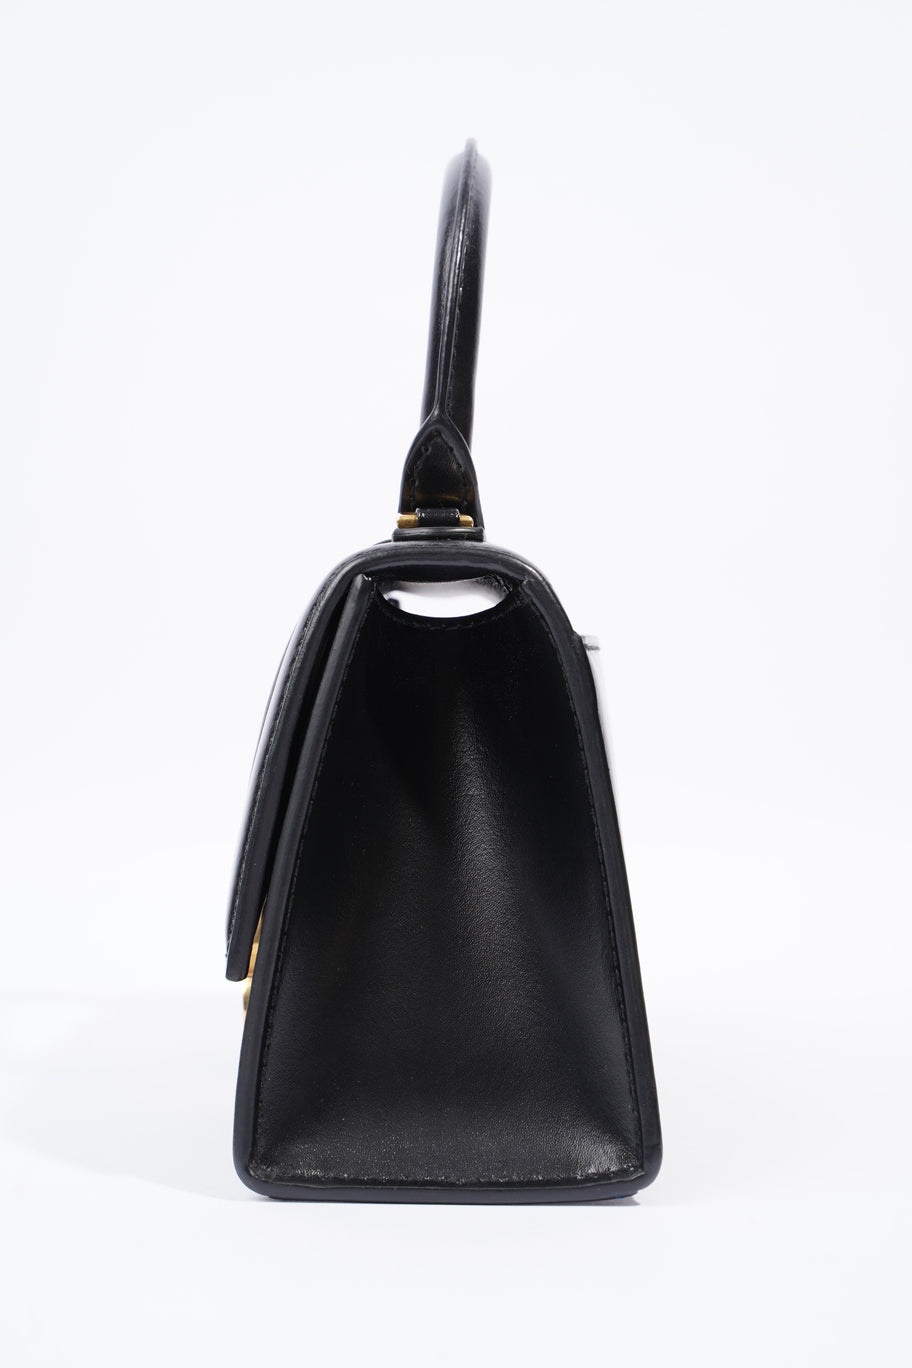 Hourglass Black Leather XS Image 3